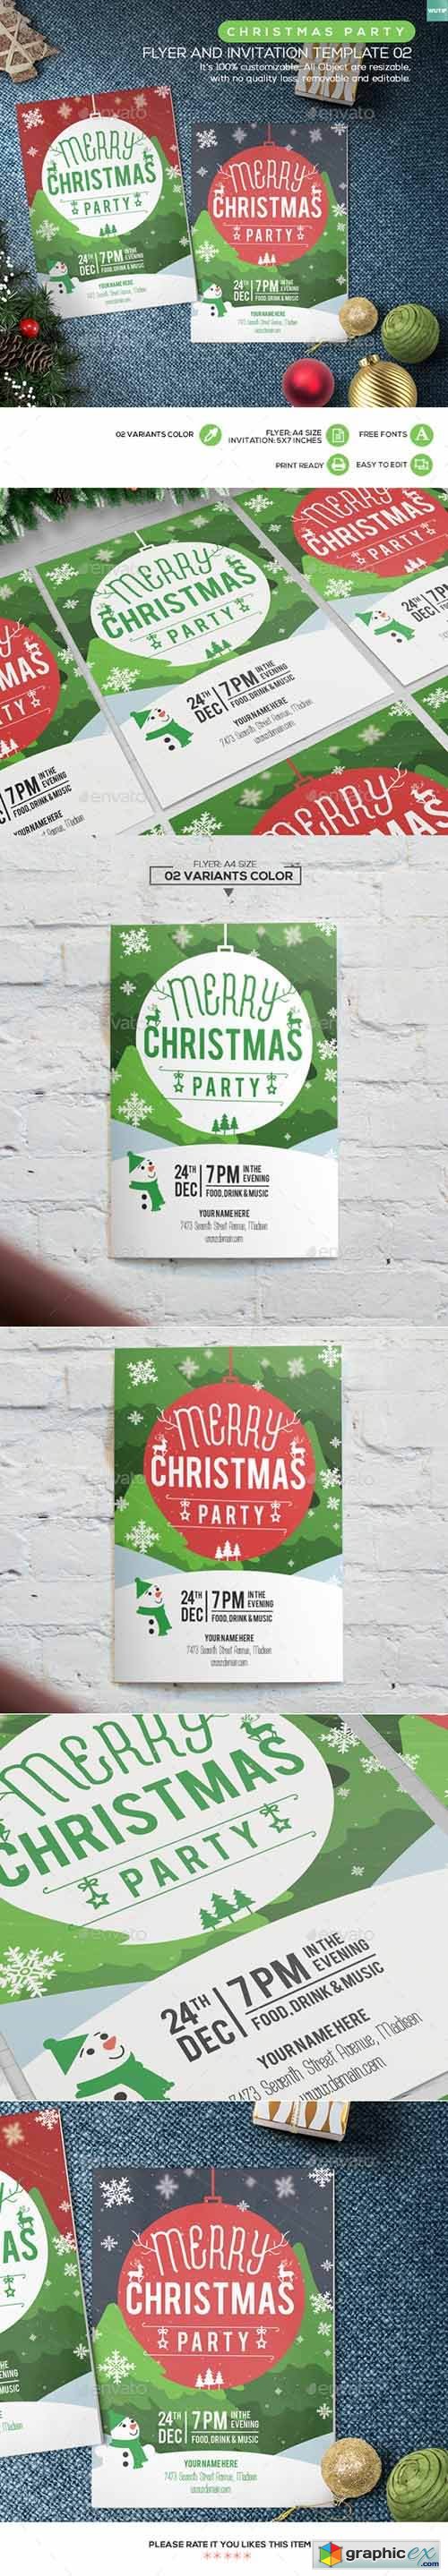 Christmas Party Flyer and Invitation Template 02